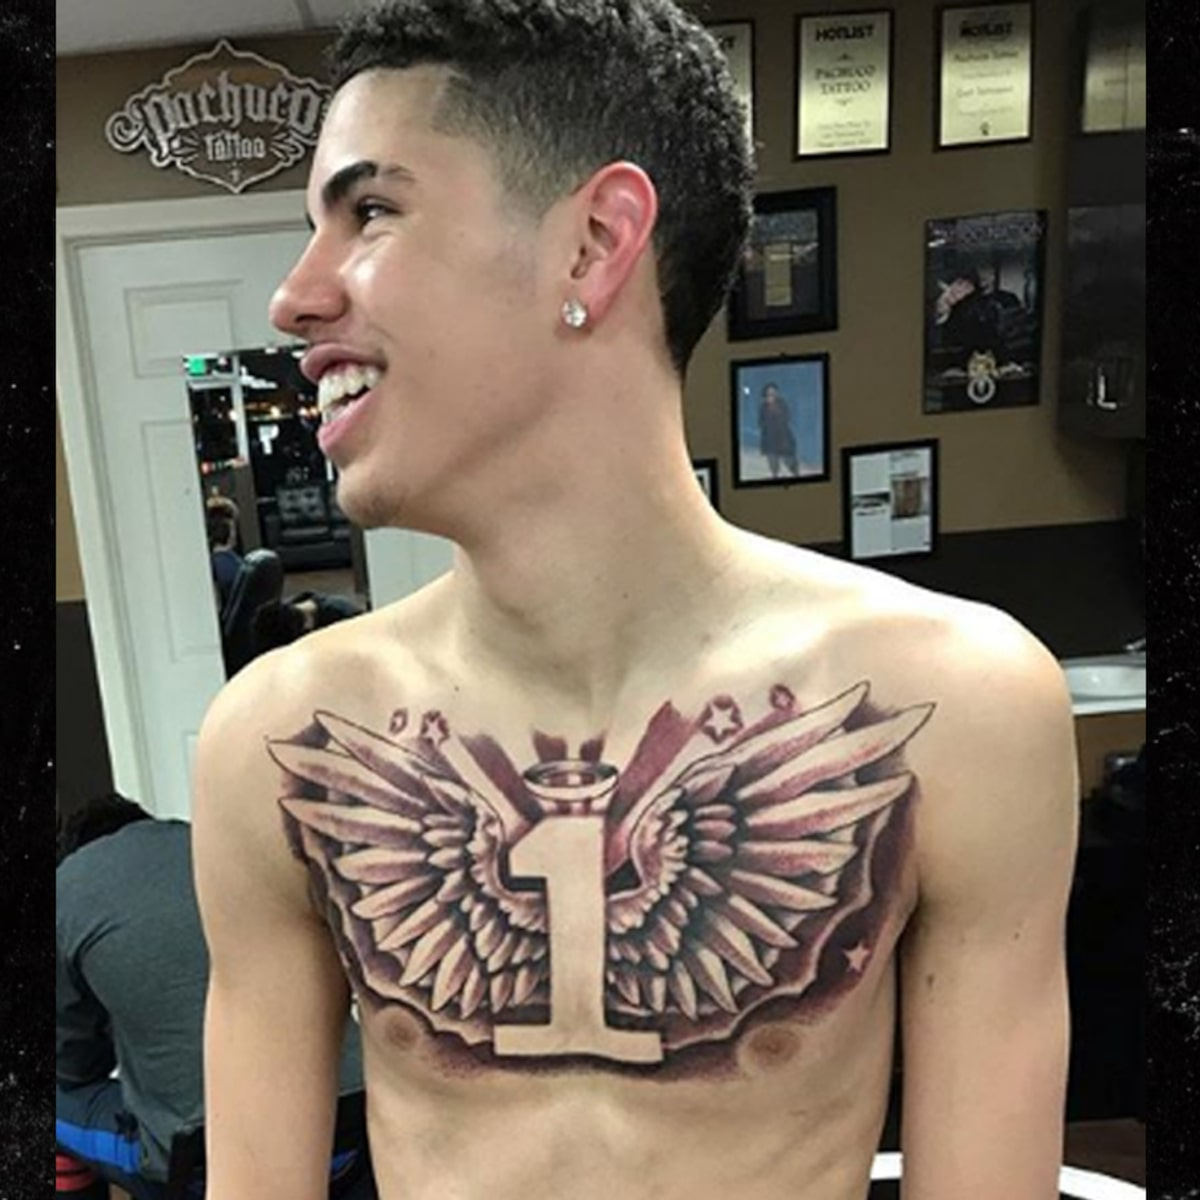 Lamelo Ball Gets Massive Chest Tattoo in dimensions 1200 X 1200.